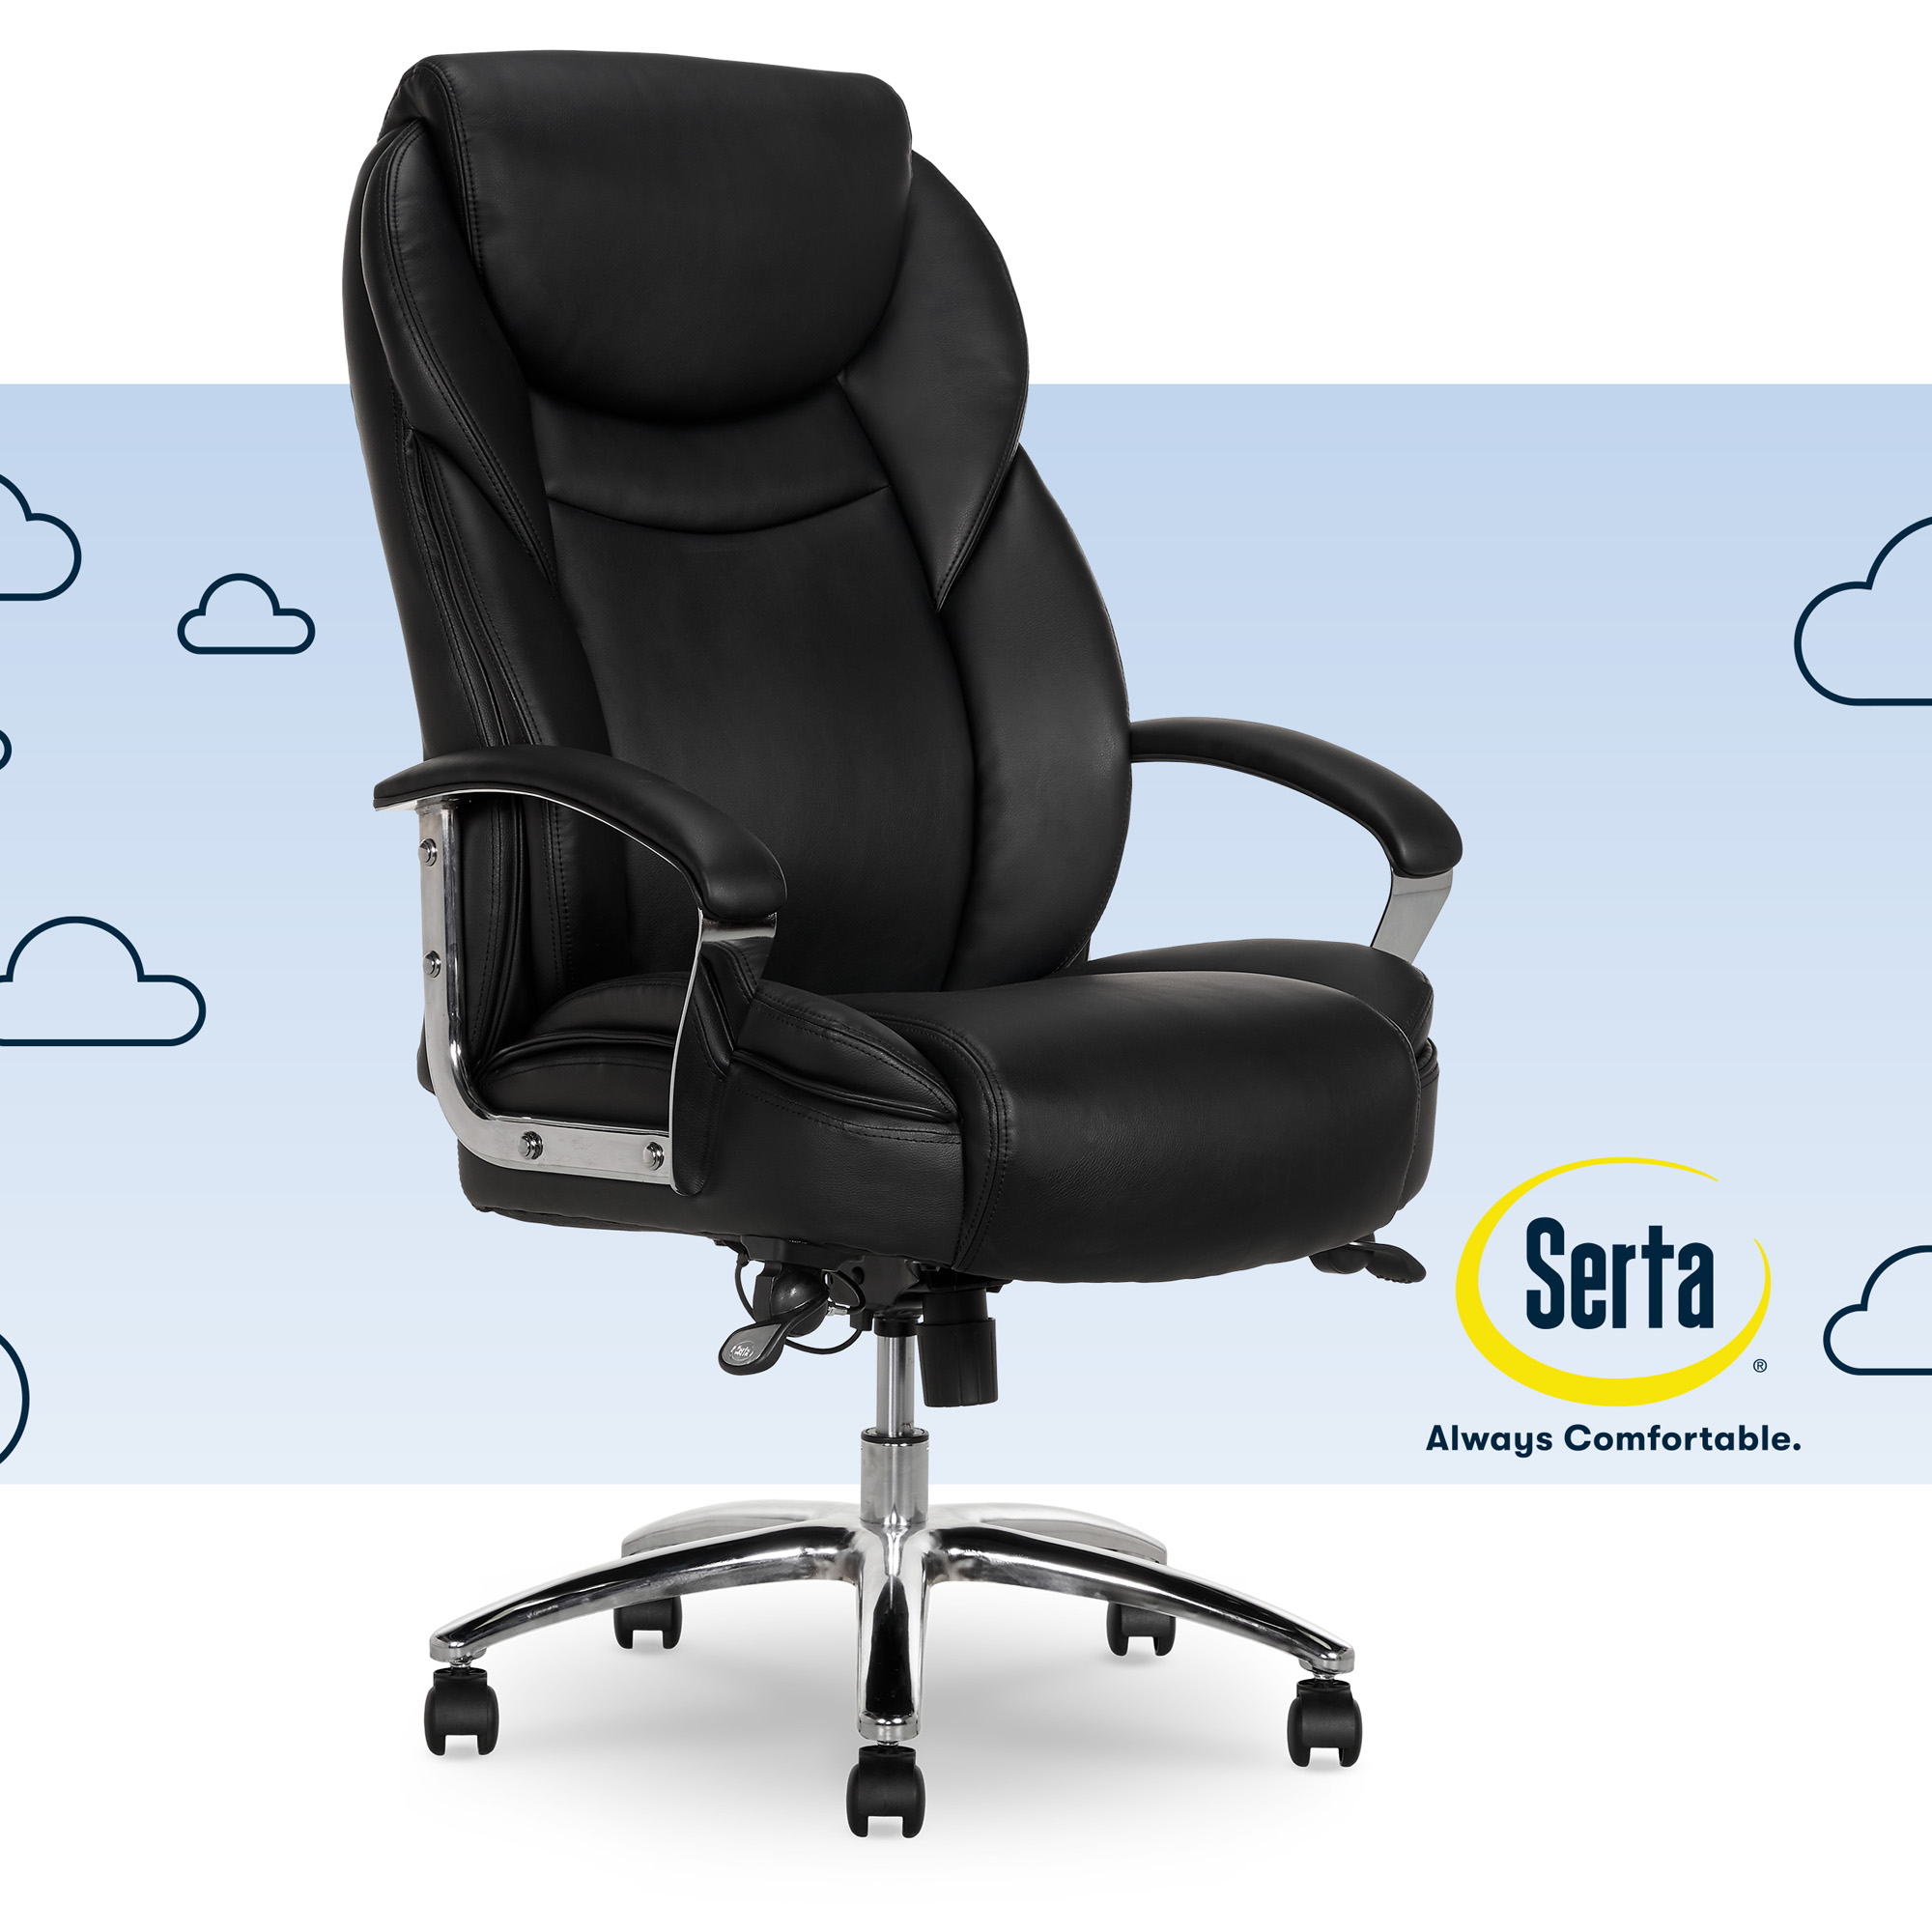 Serta Big & Tall High Back Office Chair, Heavy Duty Weight Rating, Black Bonded Leather Upholstery - image 1 of 12